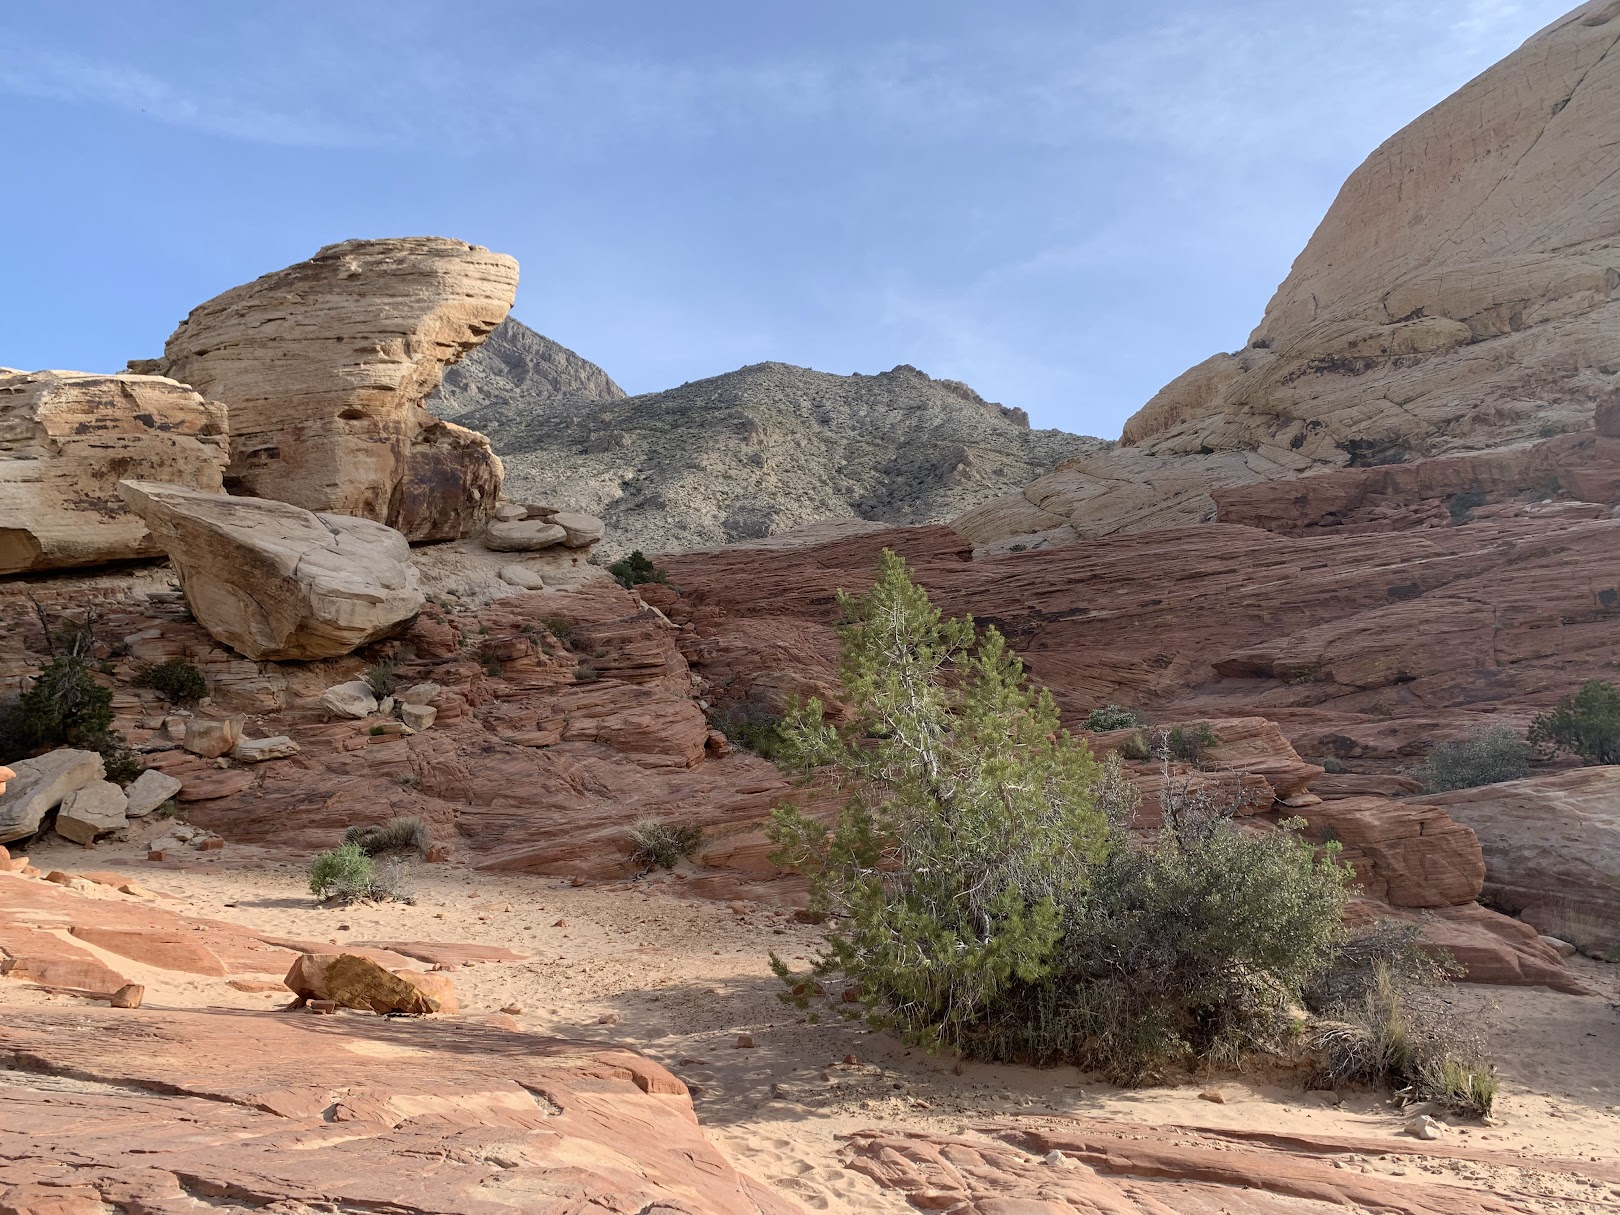 In the Red Rock Canyon National Conservation Area